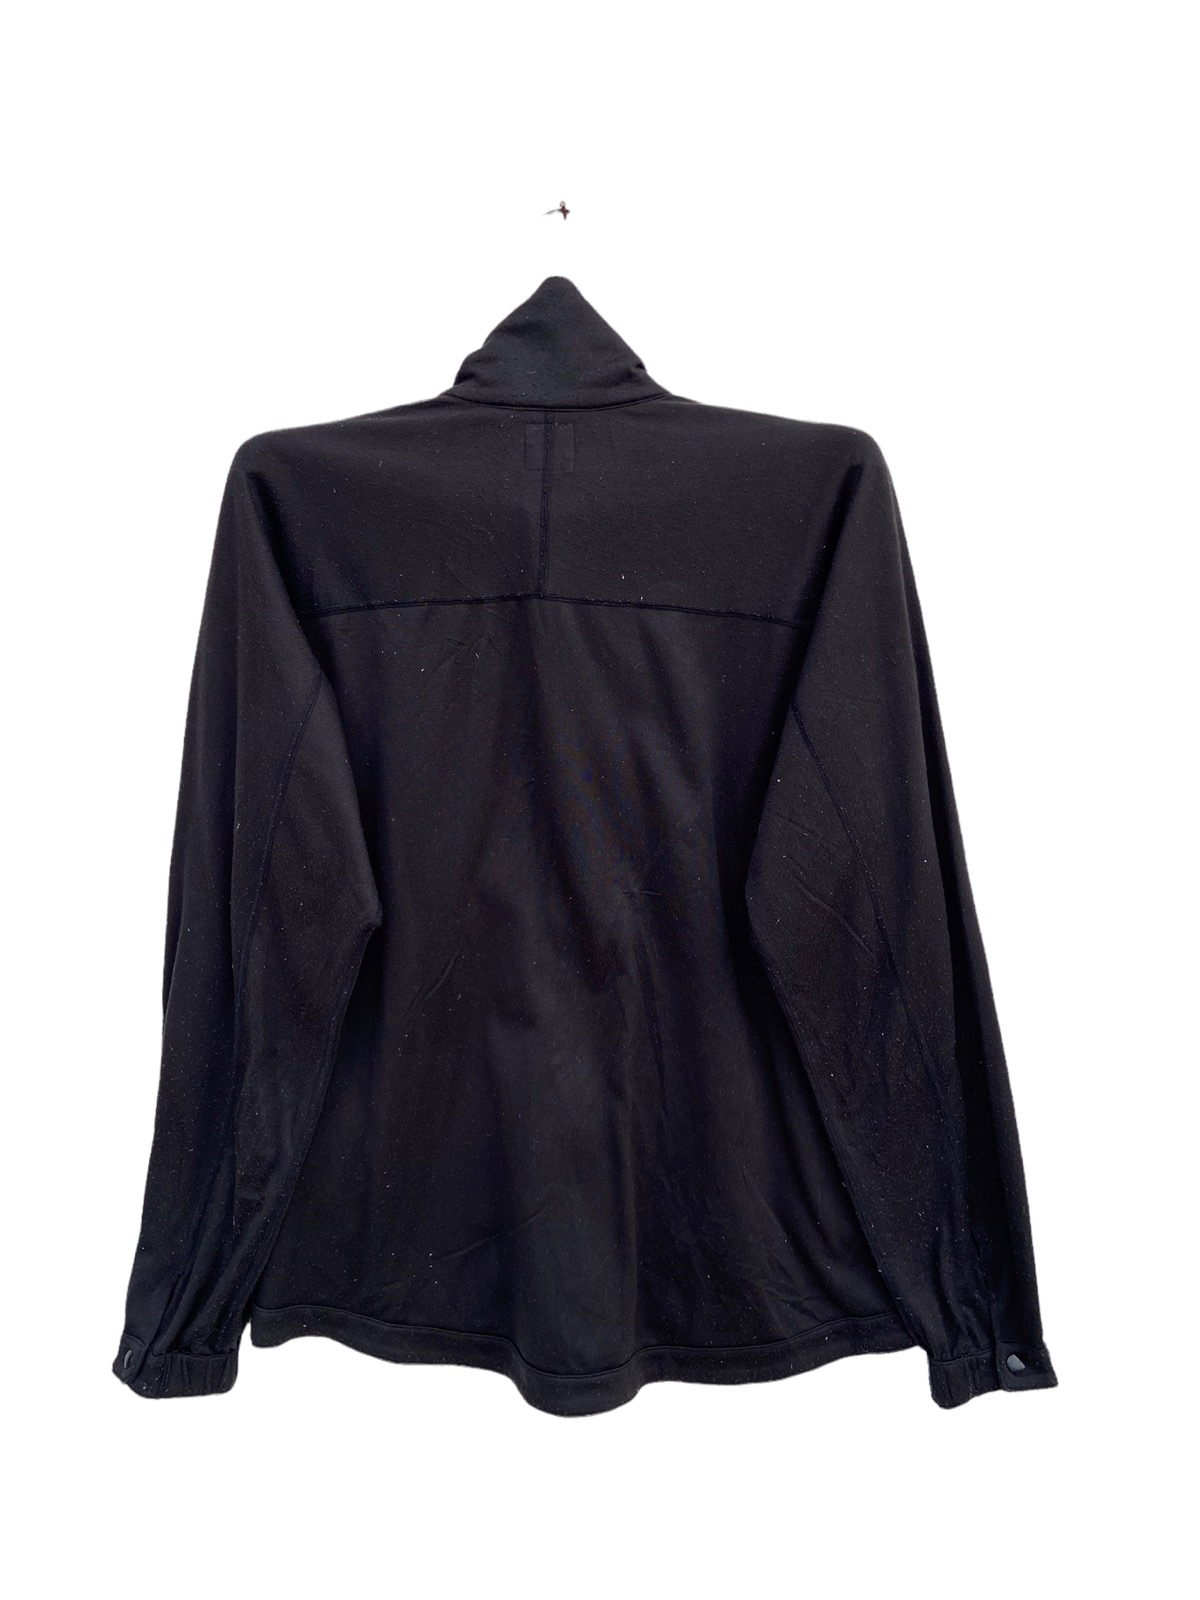 Needles Sportwear Nepenthes Tracktop - 2